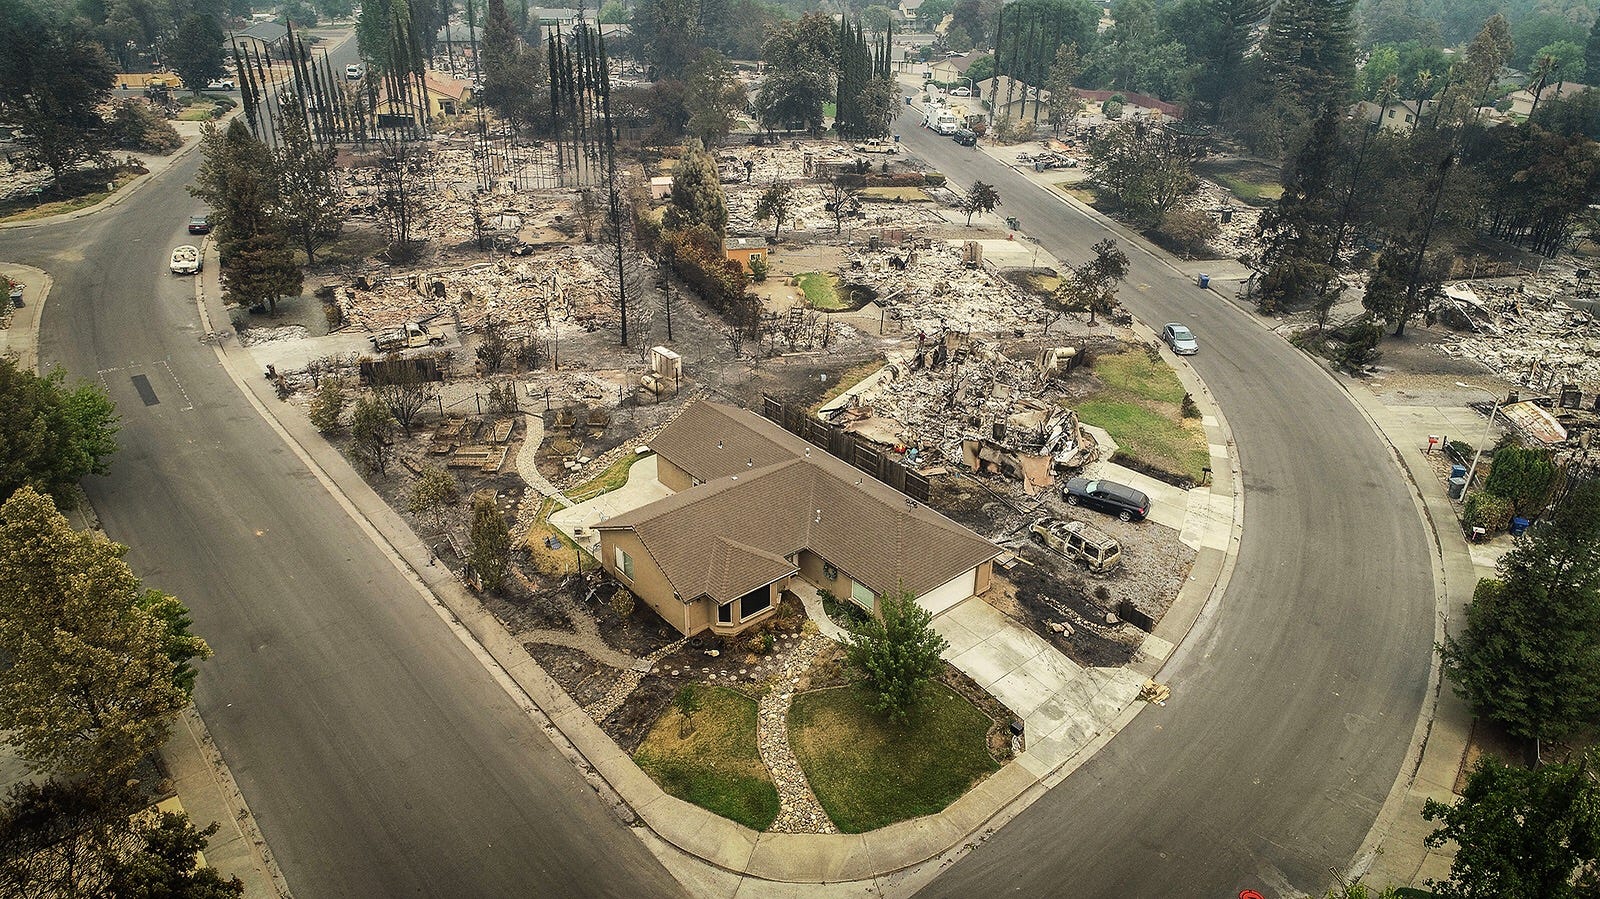 These homes in Redding Calif. show the devastation caused by the Carr Fire which roared through the area late last week, July, 31, 2018.